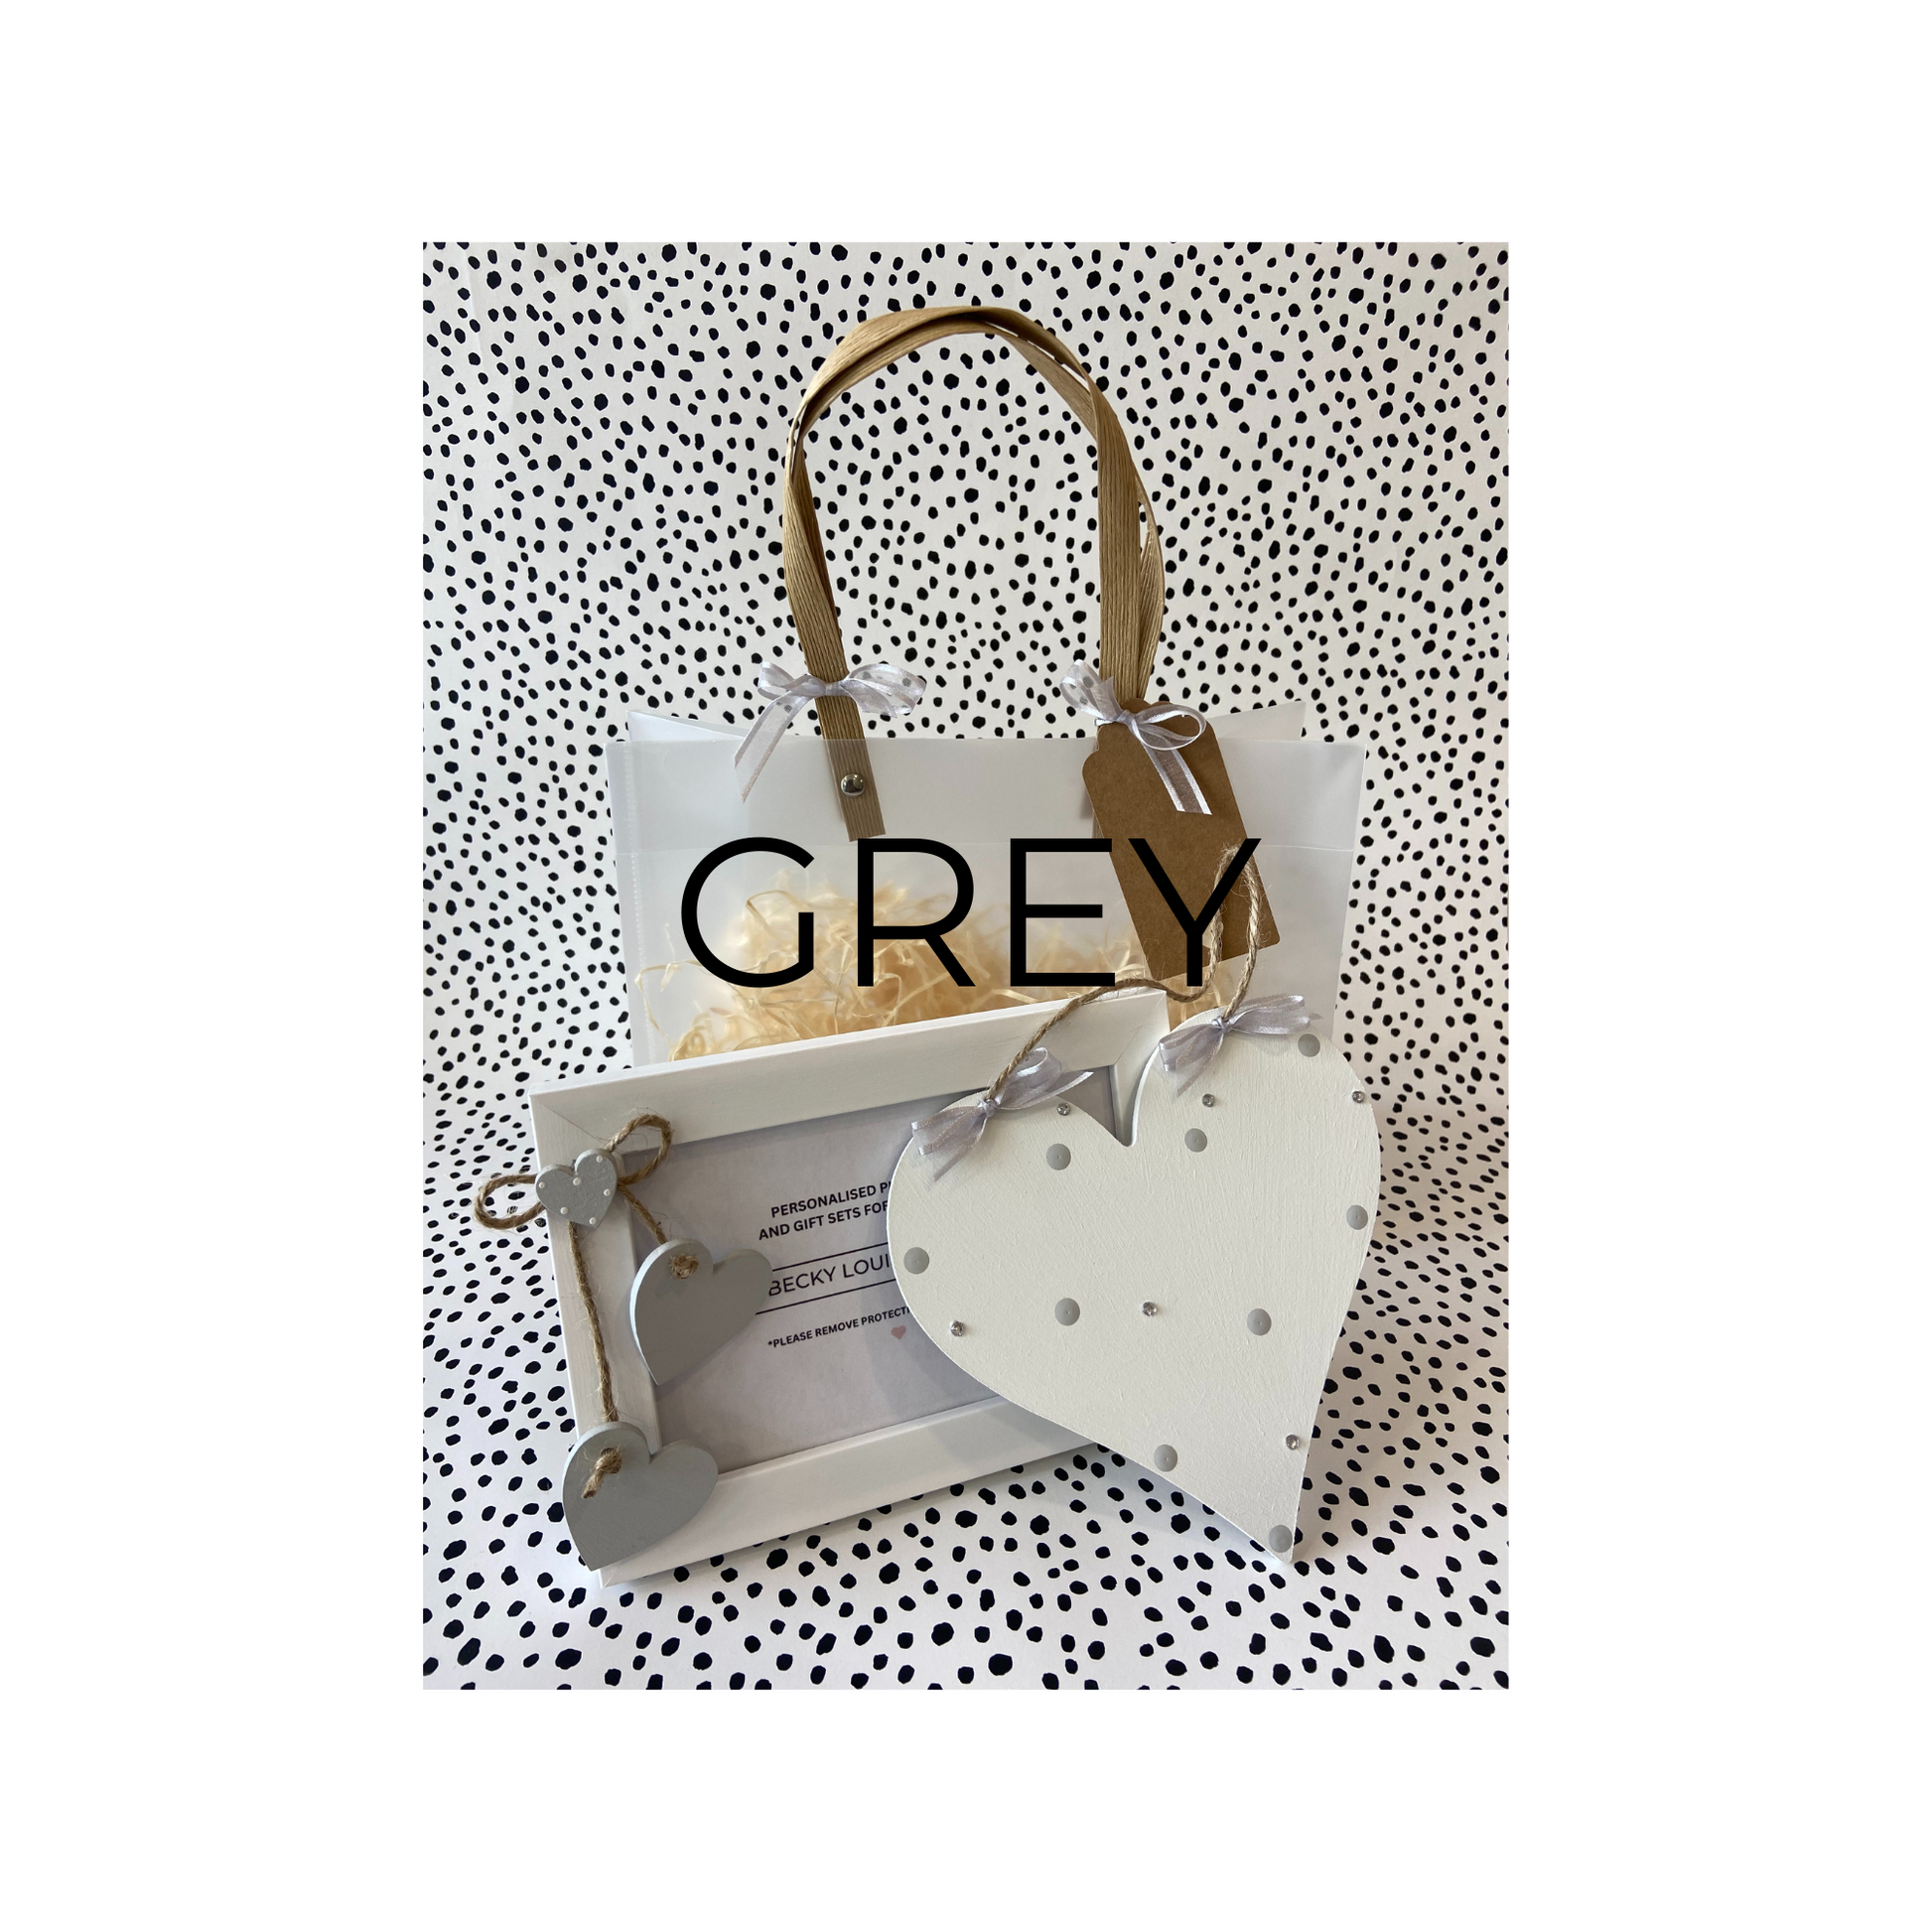 Image shows example of grey gift set